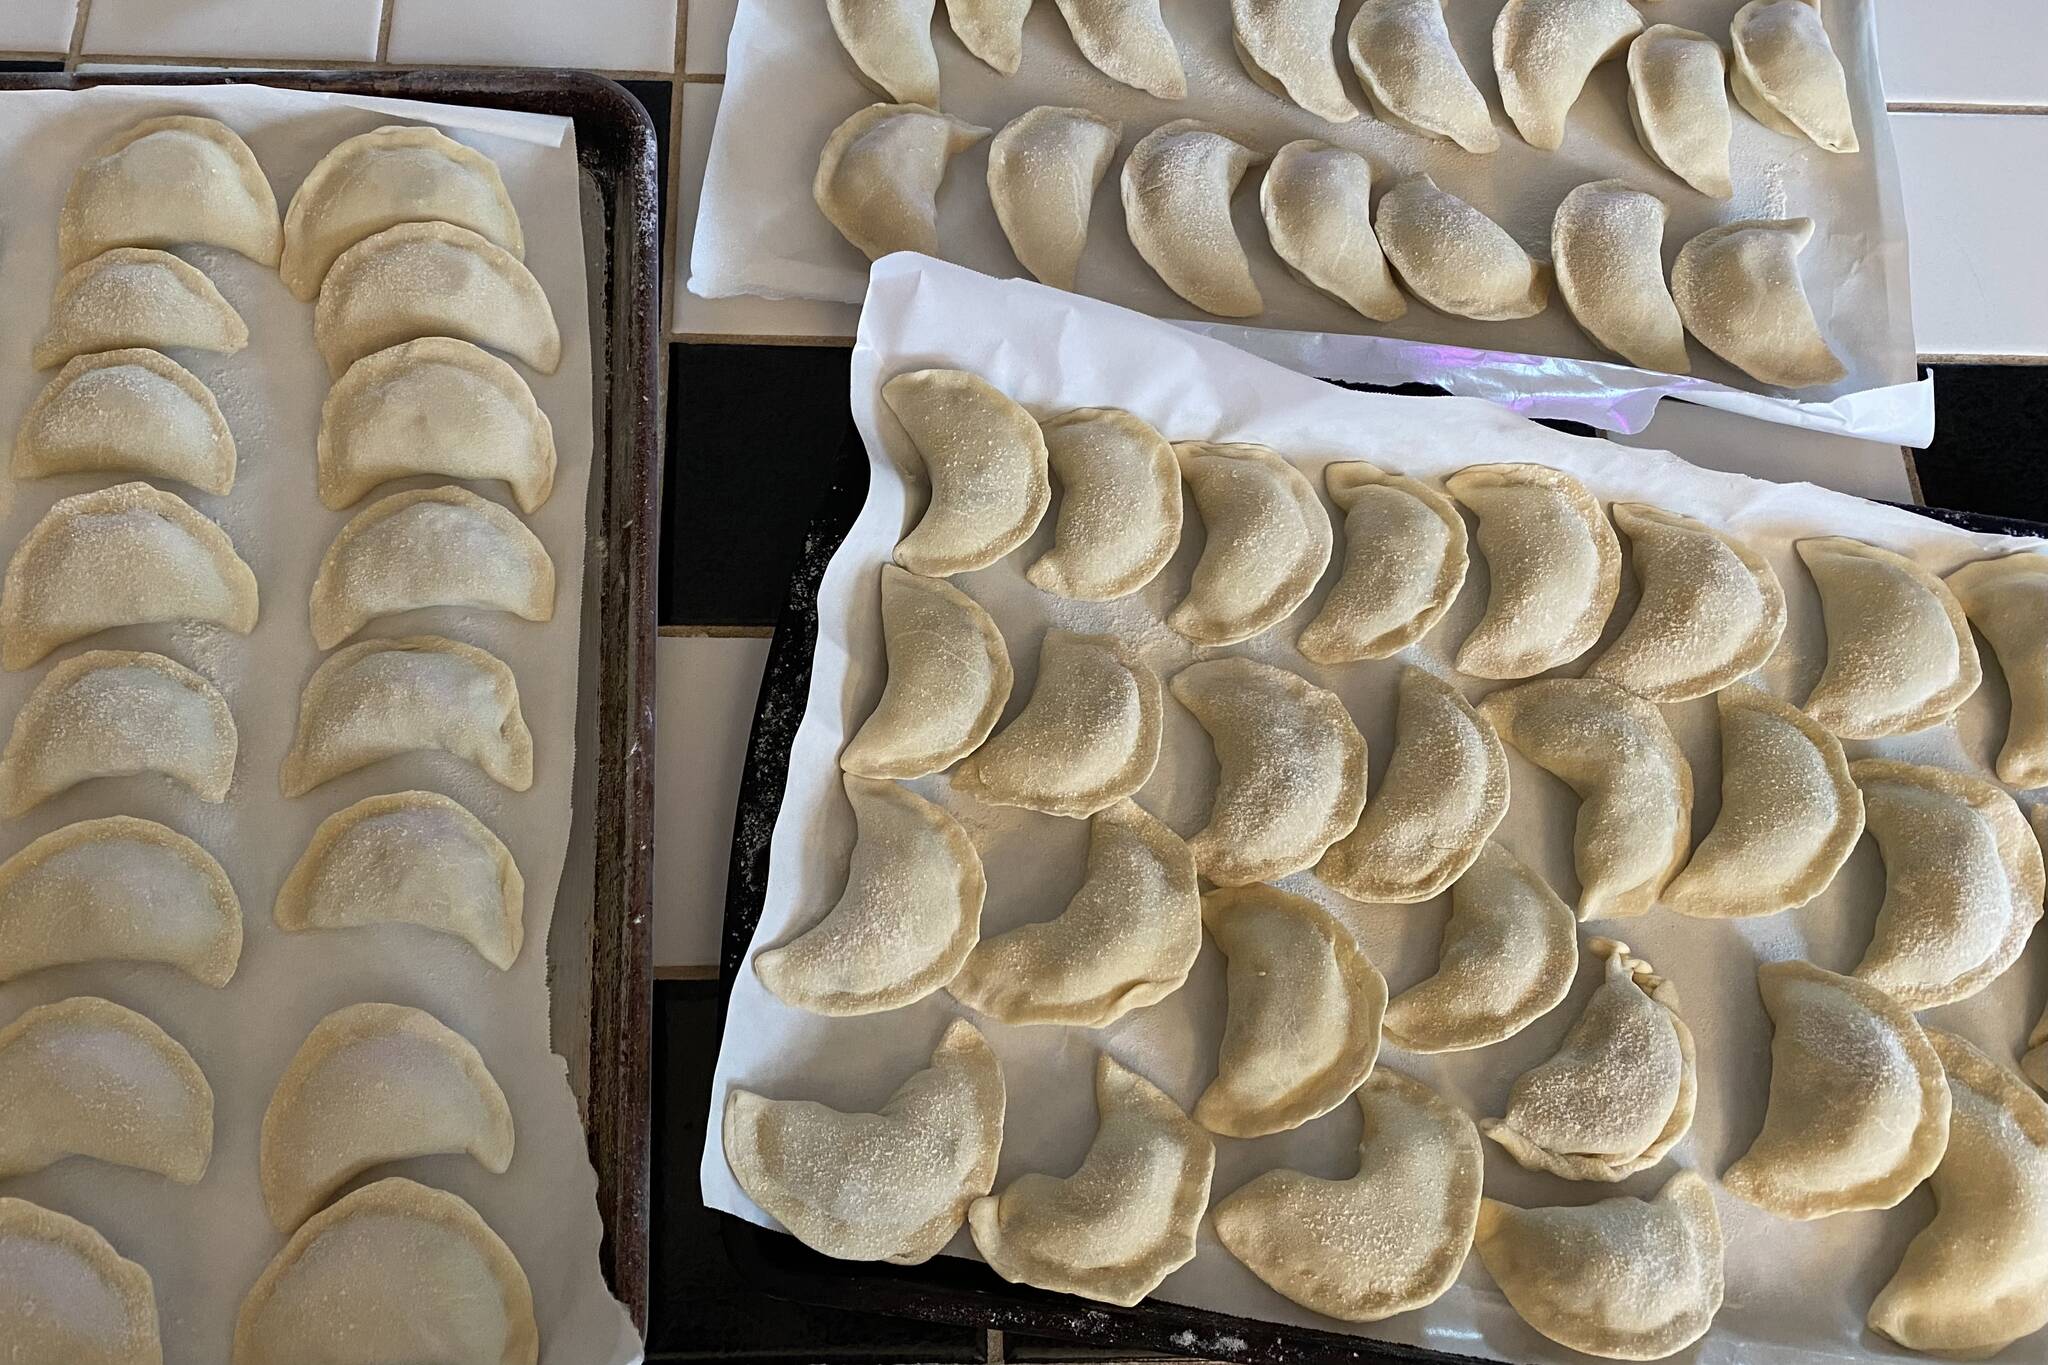 Dozens of Ukranian dumplings, called varenyky, sit after being prepared for a benefit dinner and silent auction to benefit children in war-torn Ukraine on Friday, March 25, 2022. (Courtesy photo / Olena Zubya)